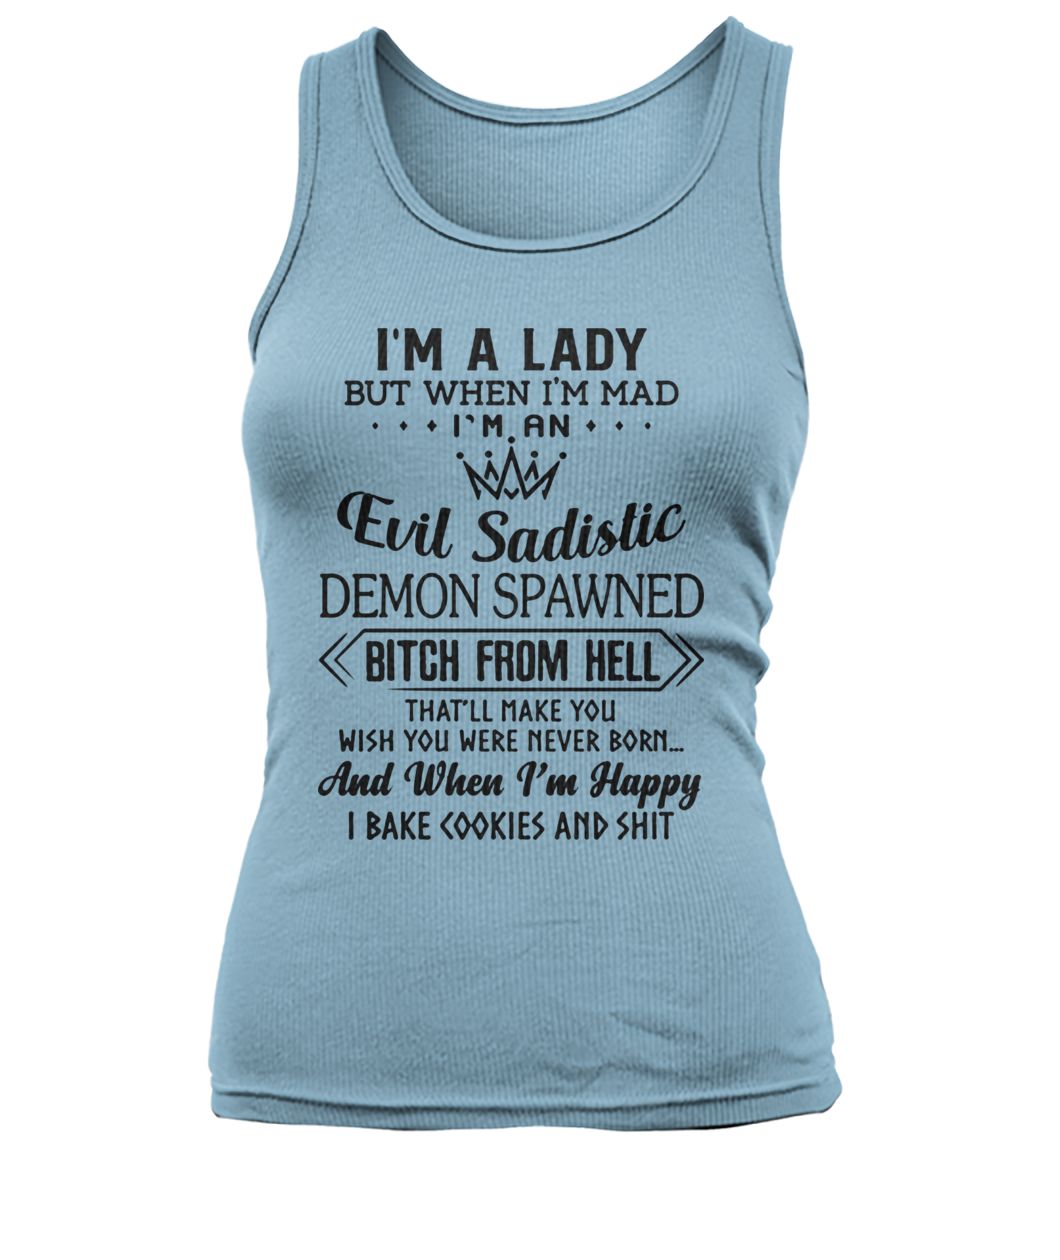 I’m a lady but when I’m mad I’m an evil sadistic demon spawned bitch from hell that'll make you women's tank top